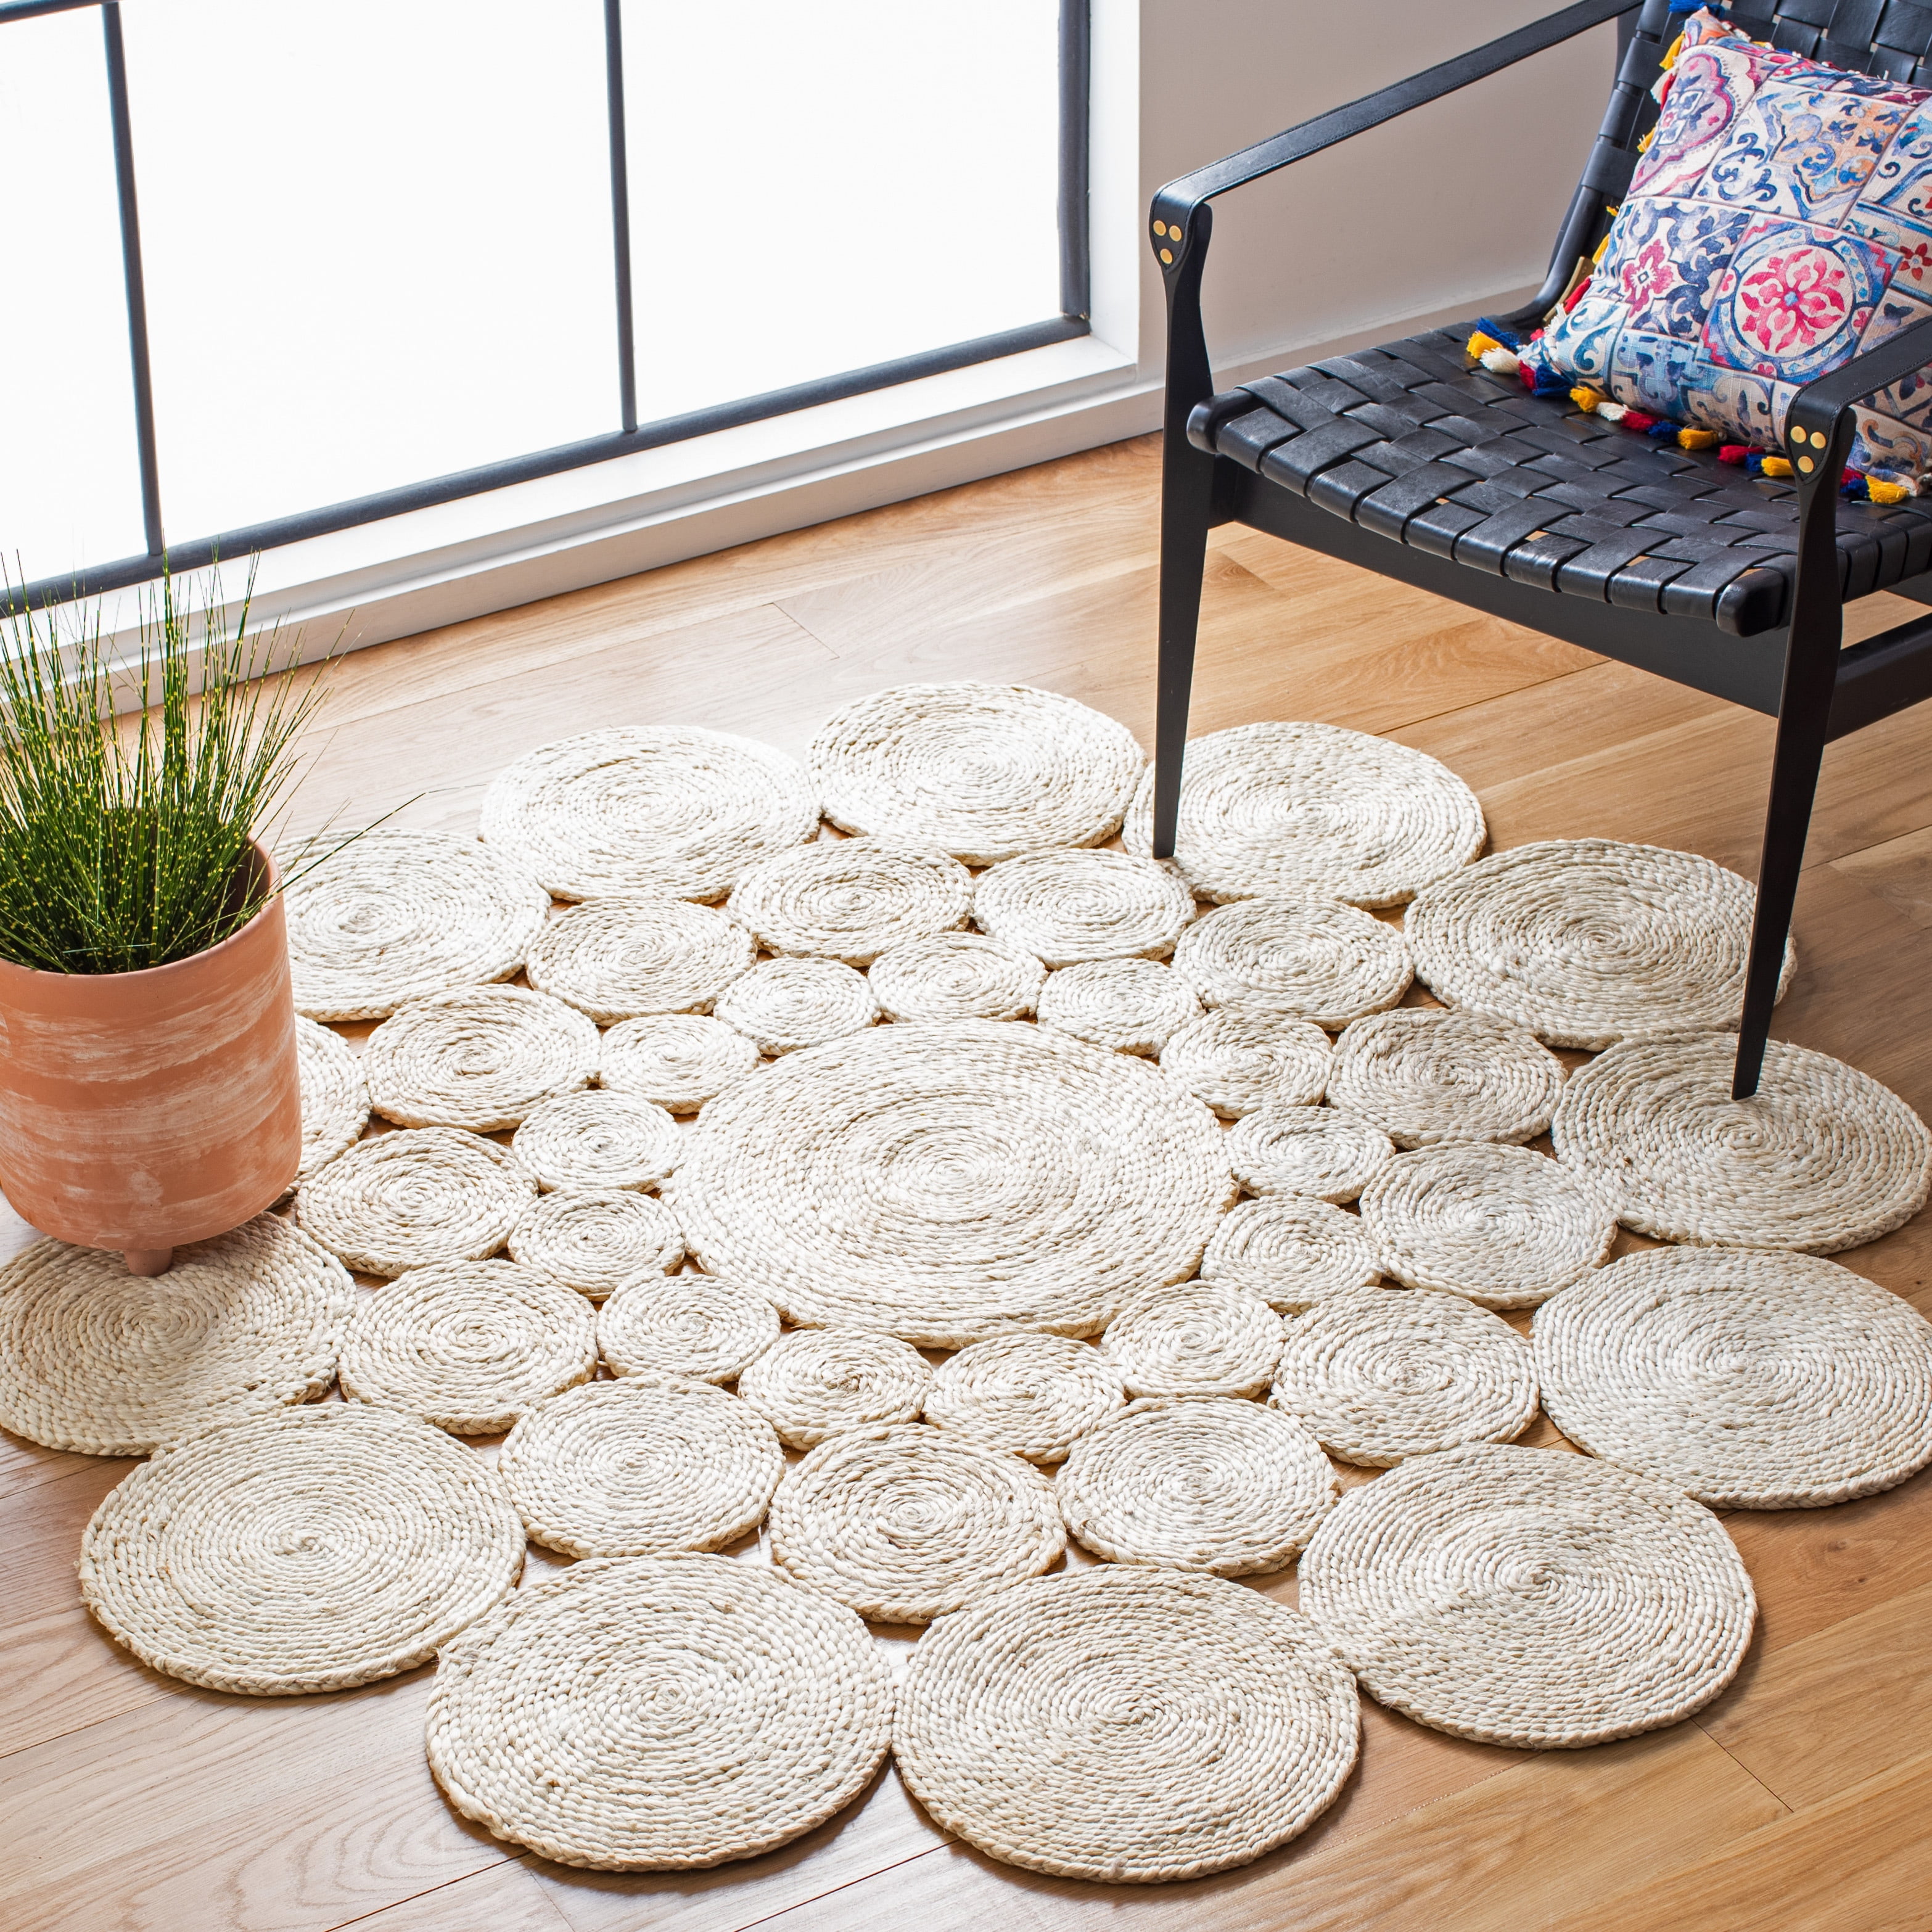 Details about   Hand Woven Jute 6'7''x6'7'' Round Eco-friendly Area Rug Oriental Natural J00001 